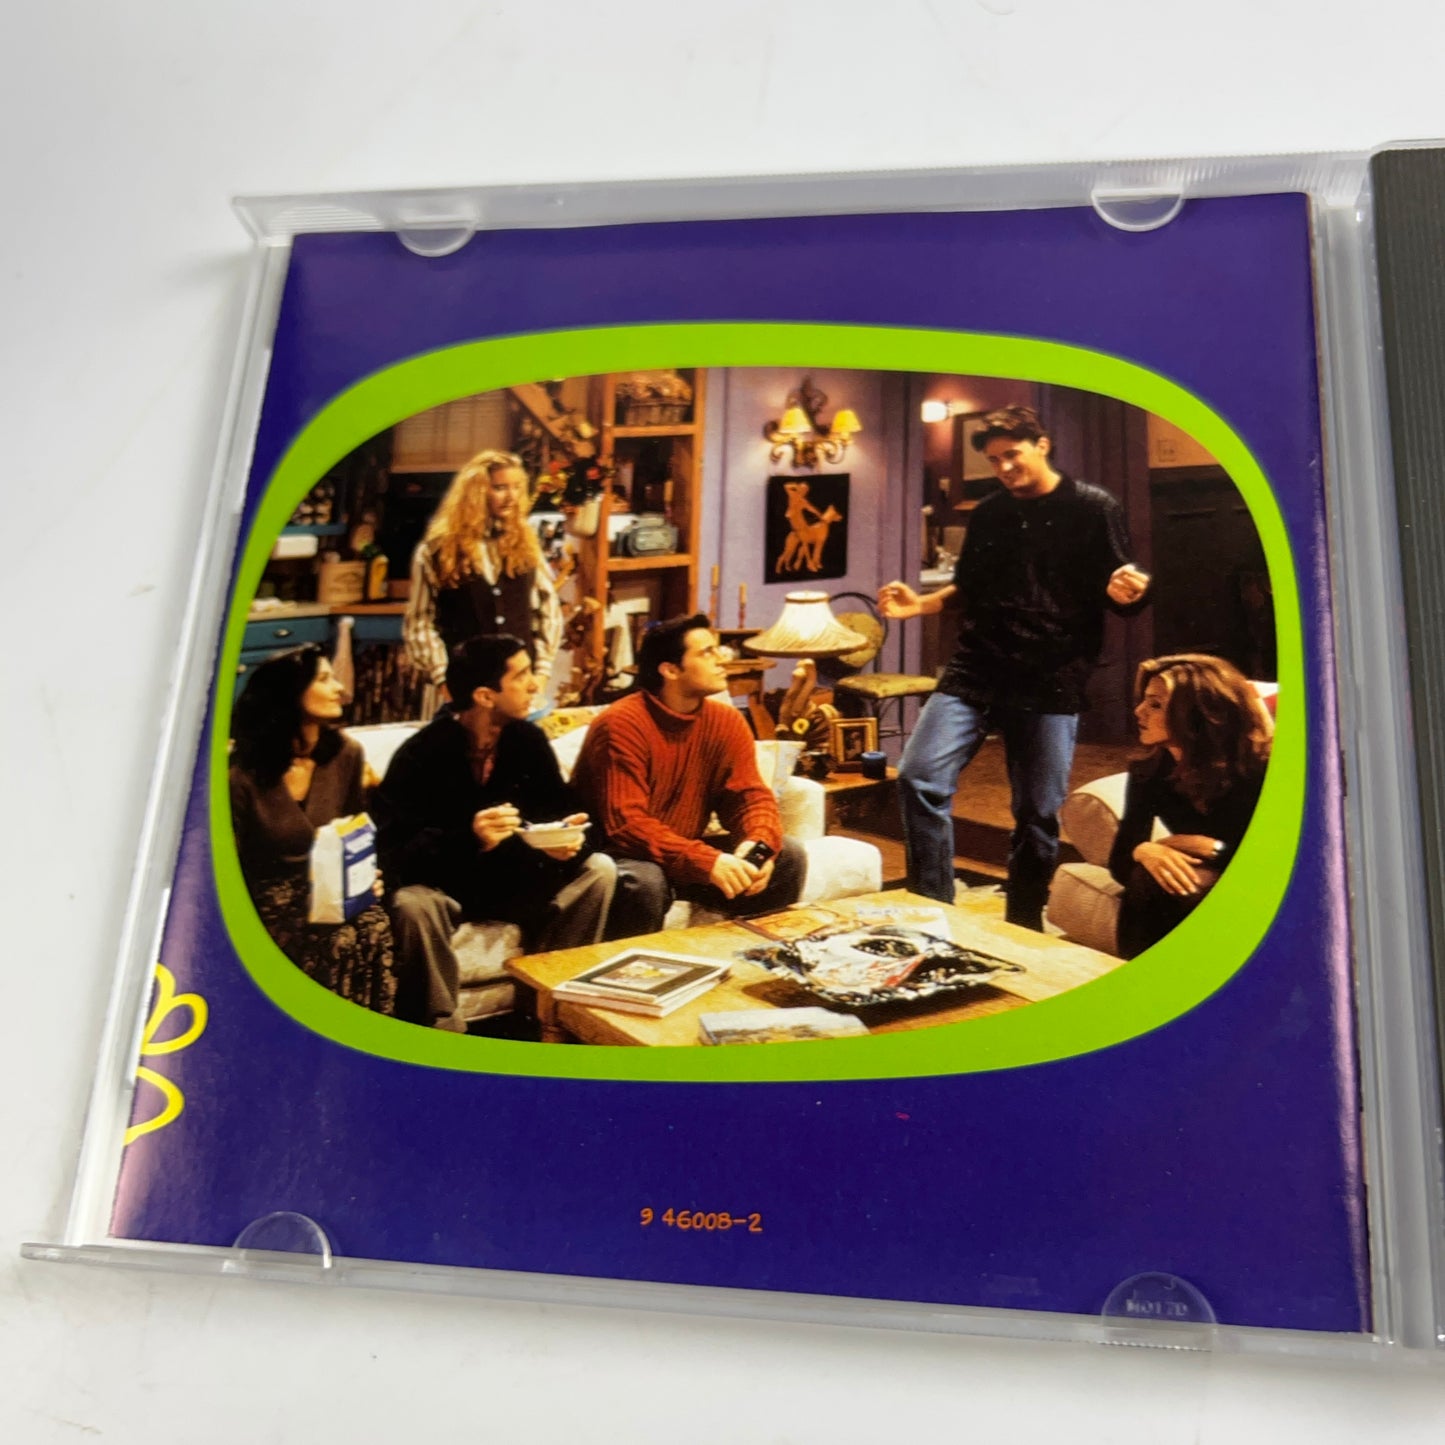 Friends (Television Series) - Audio CD By Friends Soundtrack